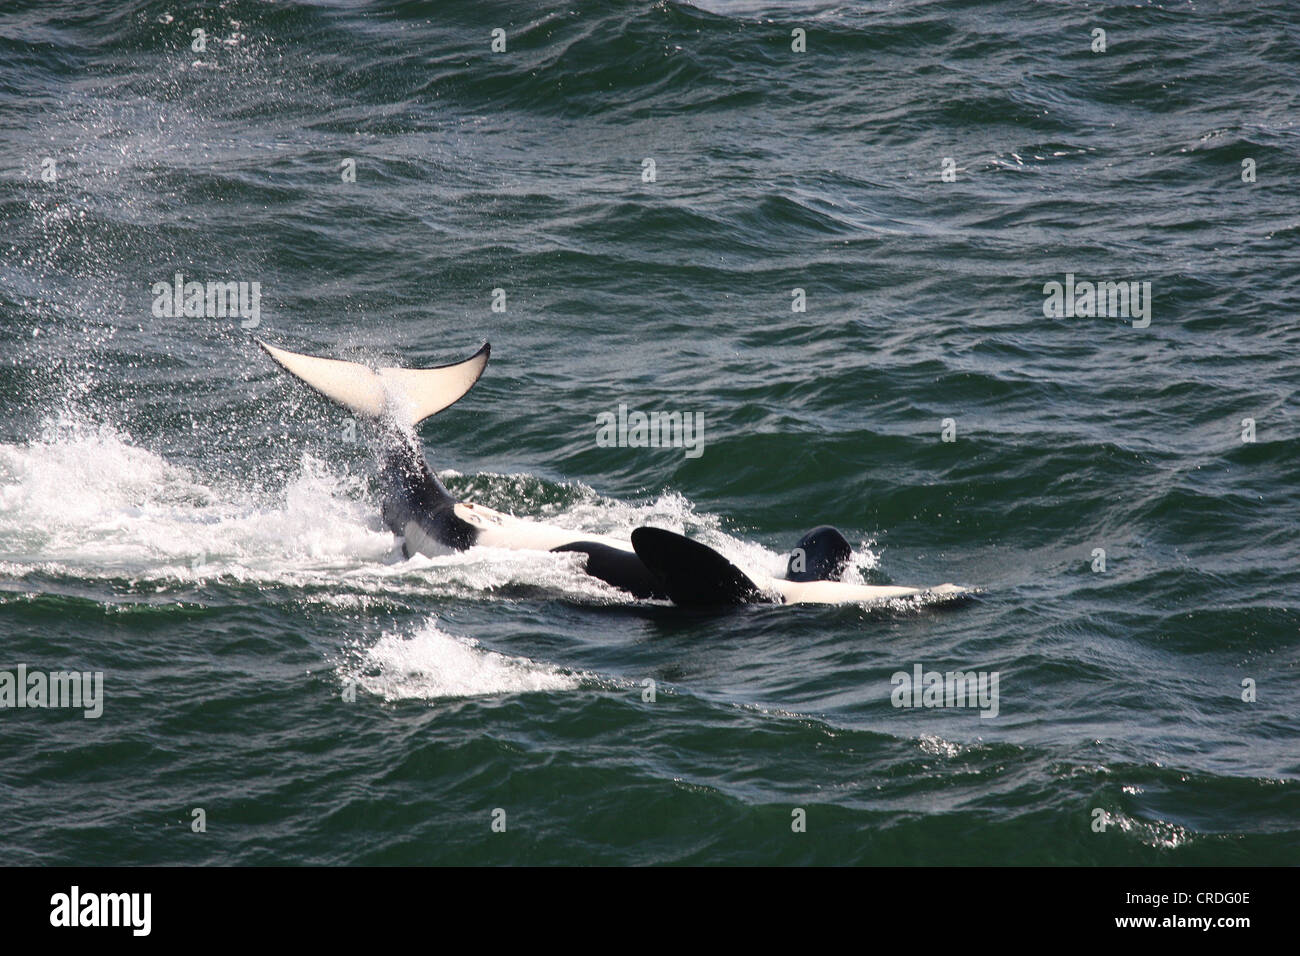 Killer Whale (Orca) slapping its tail while swimming on its back in Swanson Channel west of Pender Island, BC Stock Photo